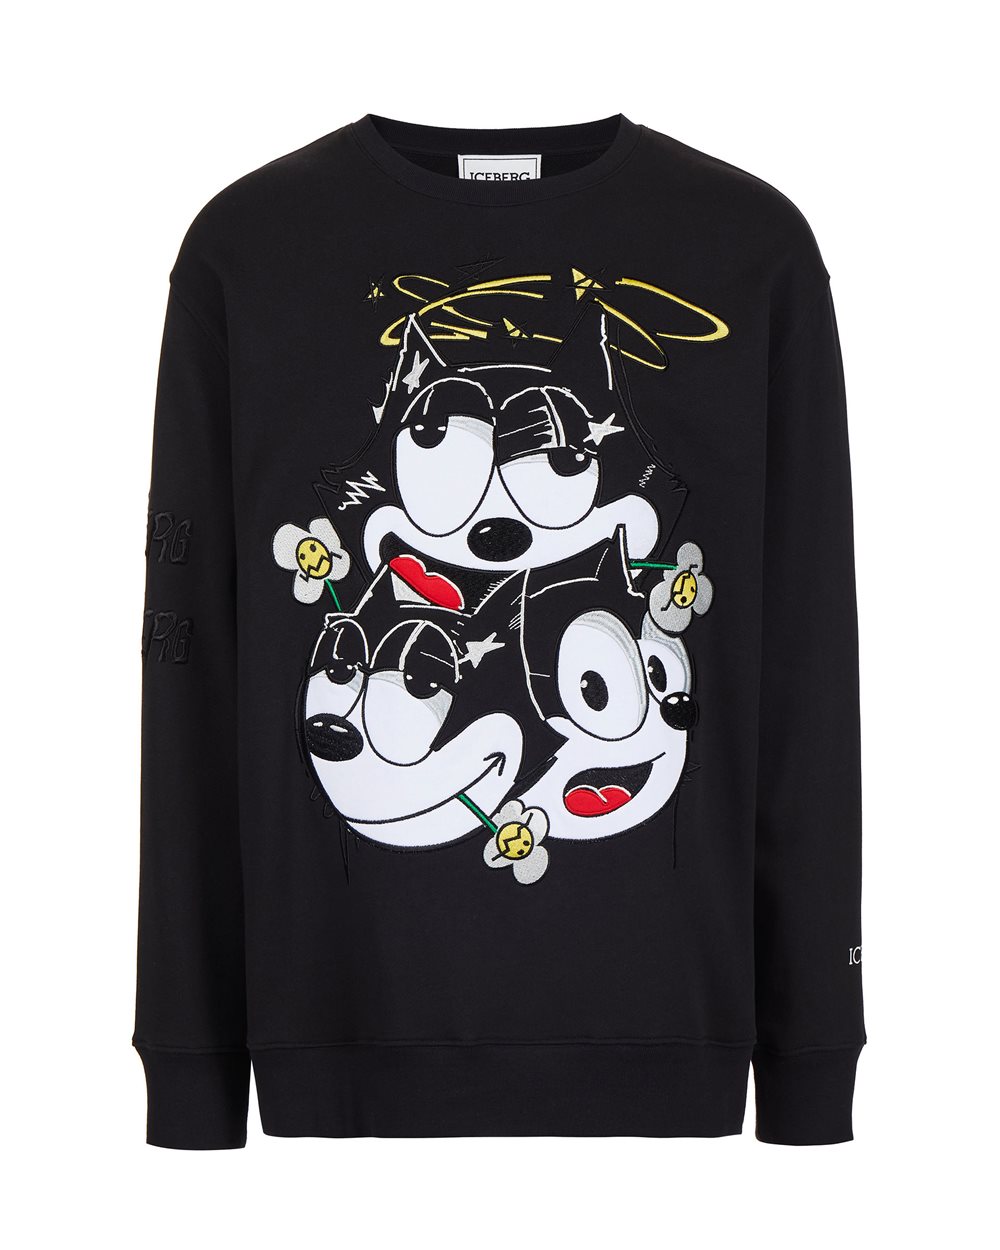 Sweatshirt with cartoon graphics and logo - VAMEE SELECTION | Iceberg - Official Website